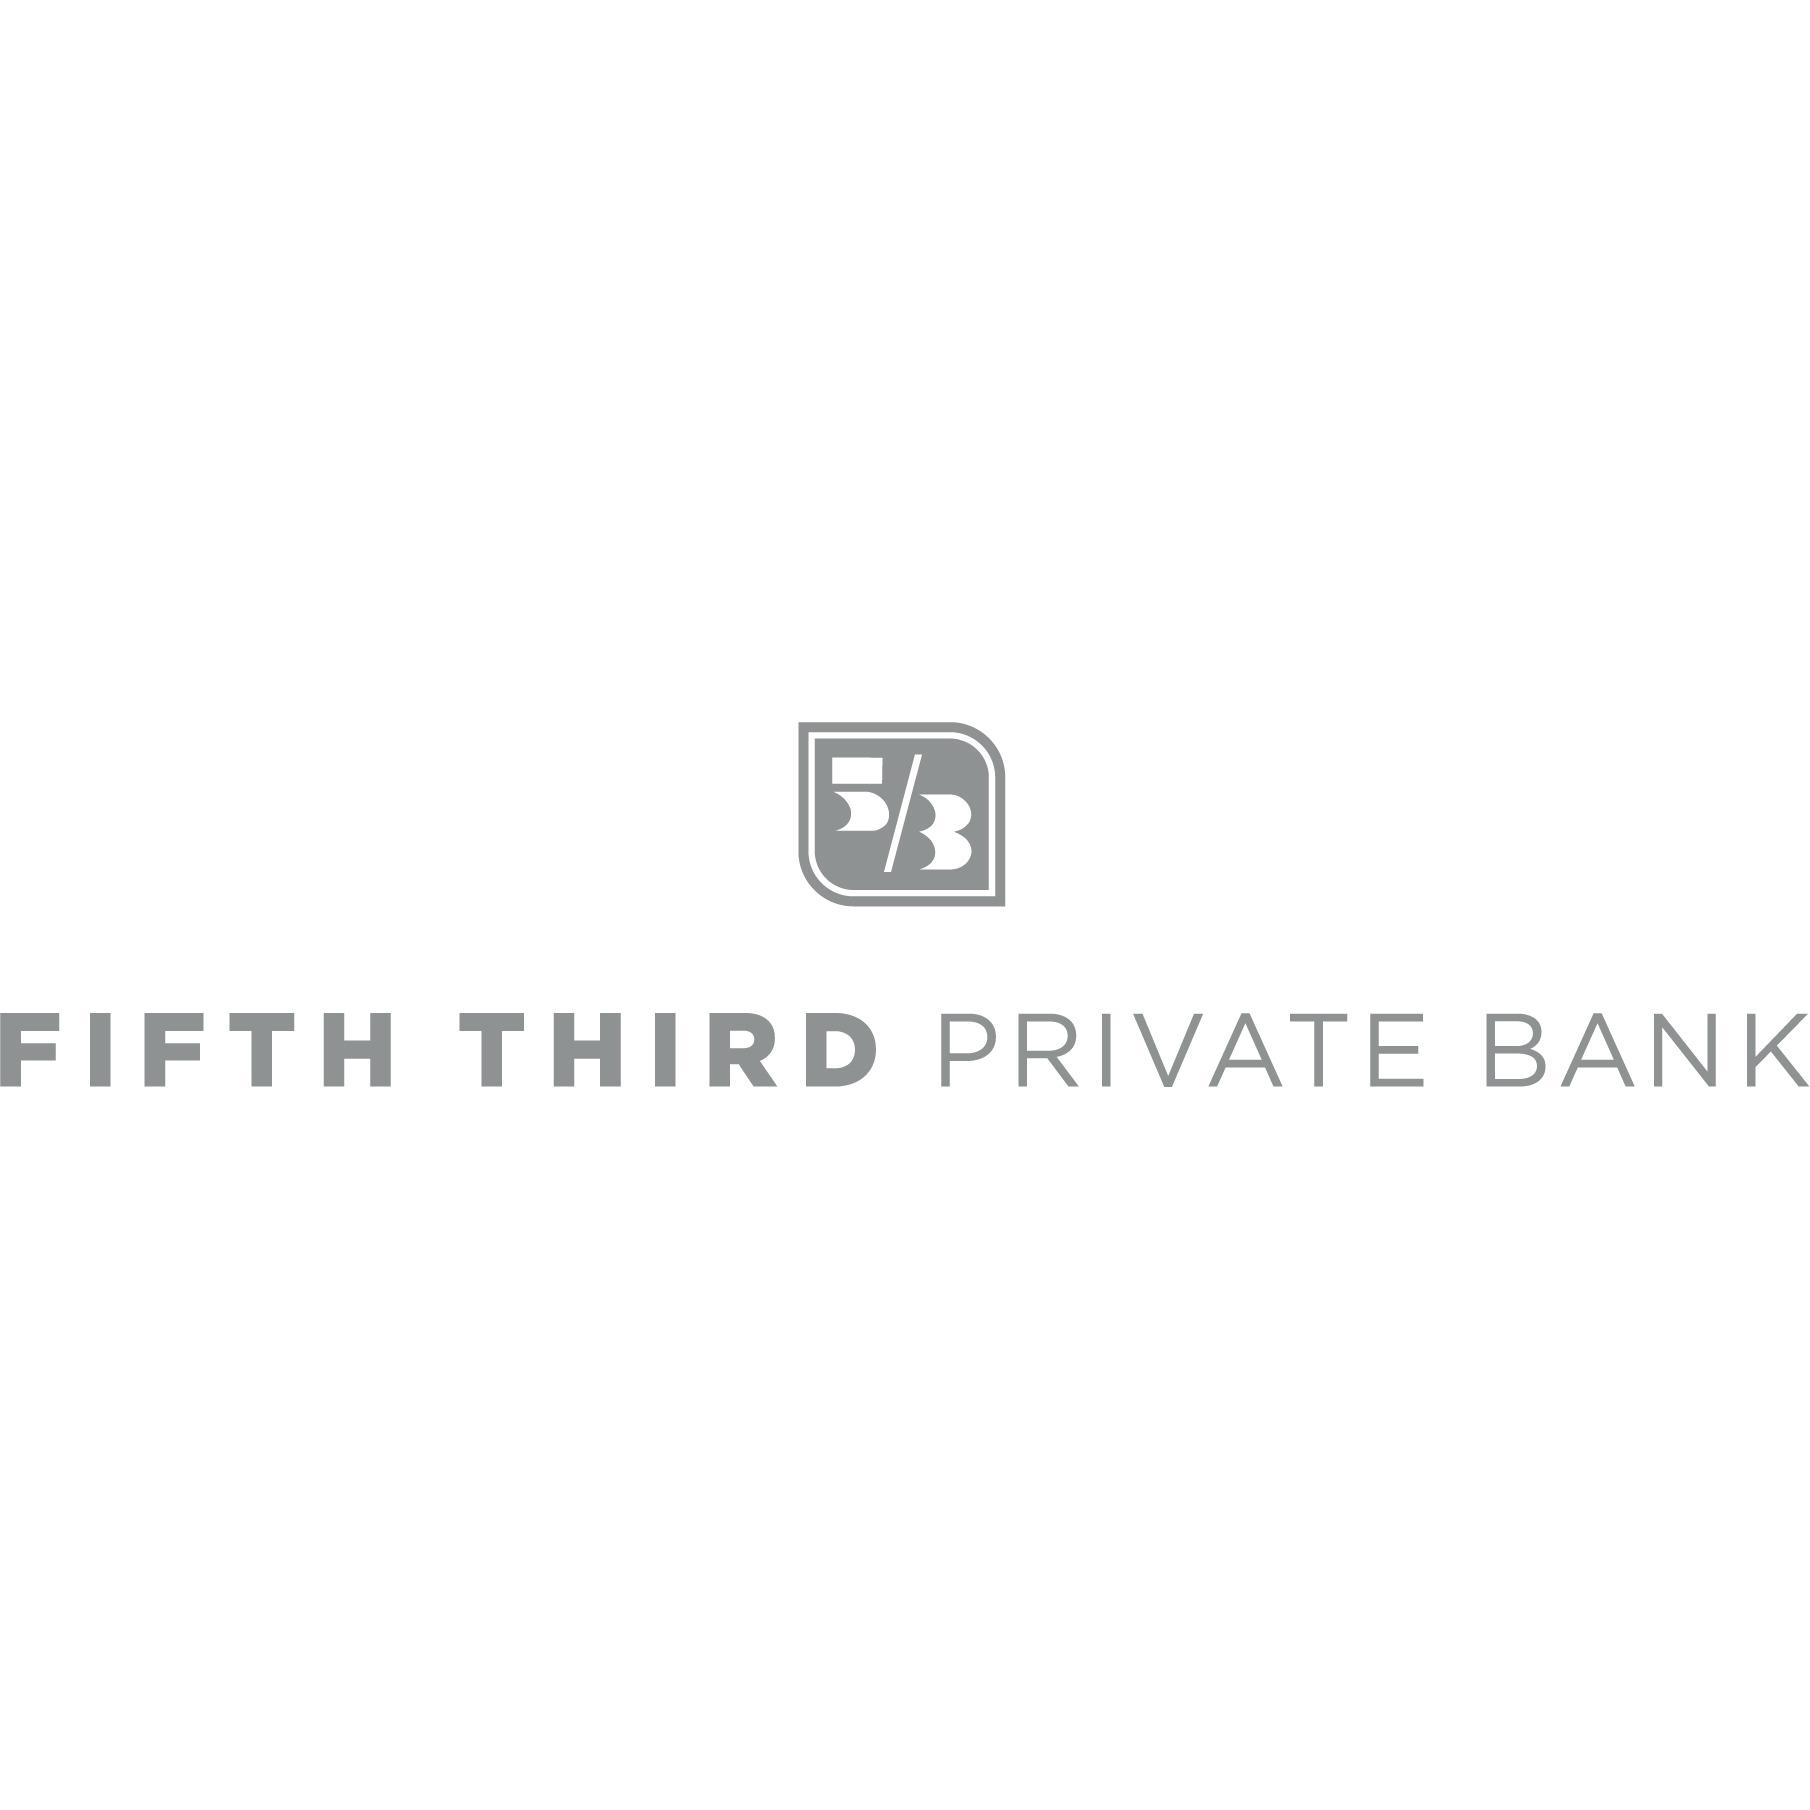 Fifth Third Private Bank - Robert Cook Photo